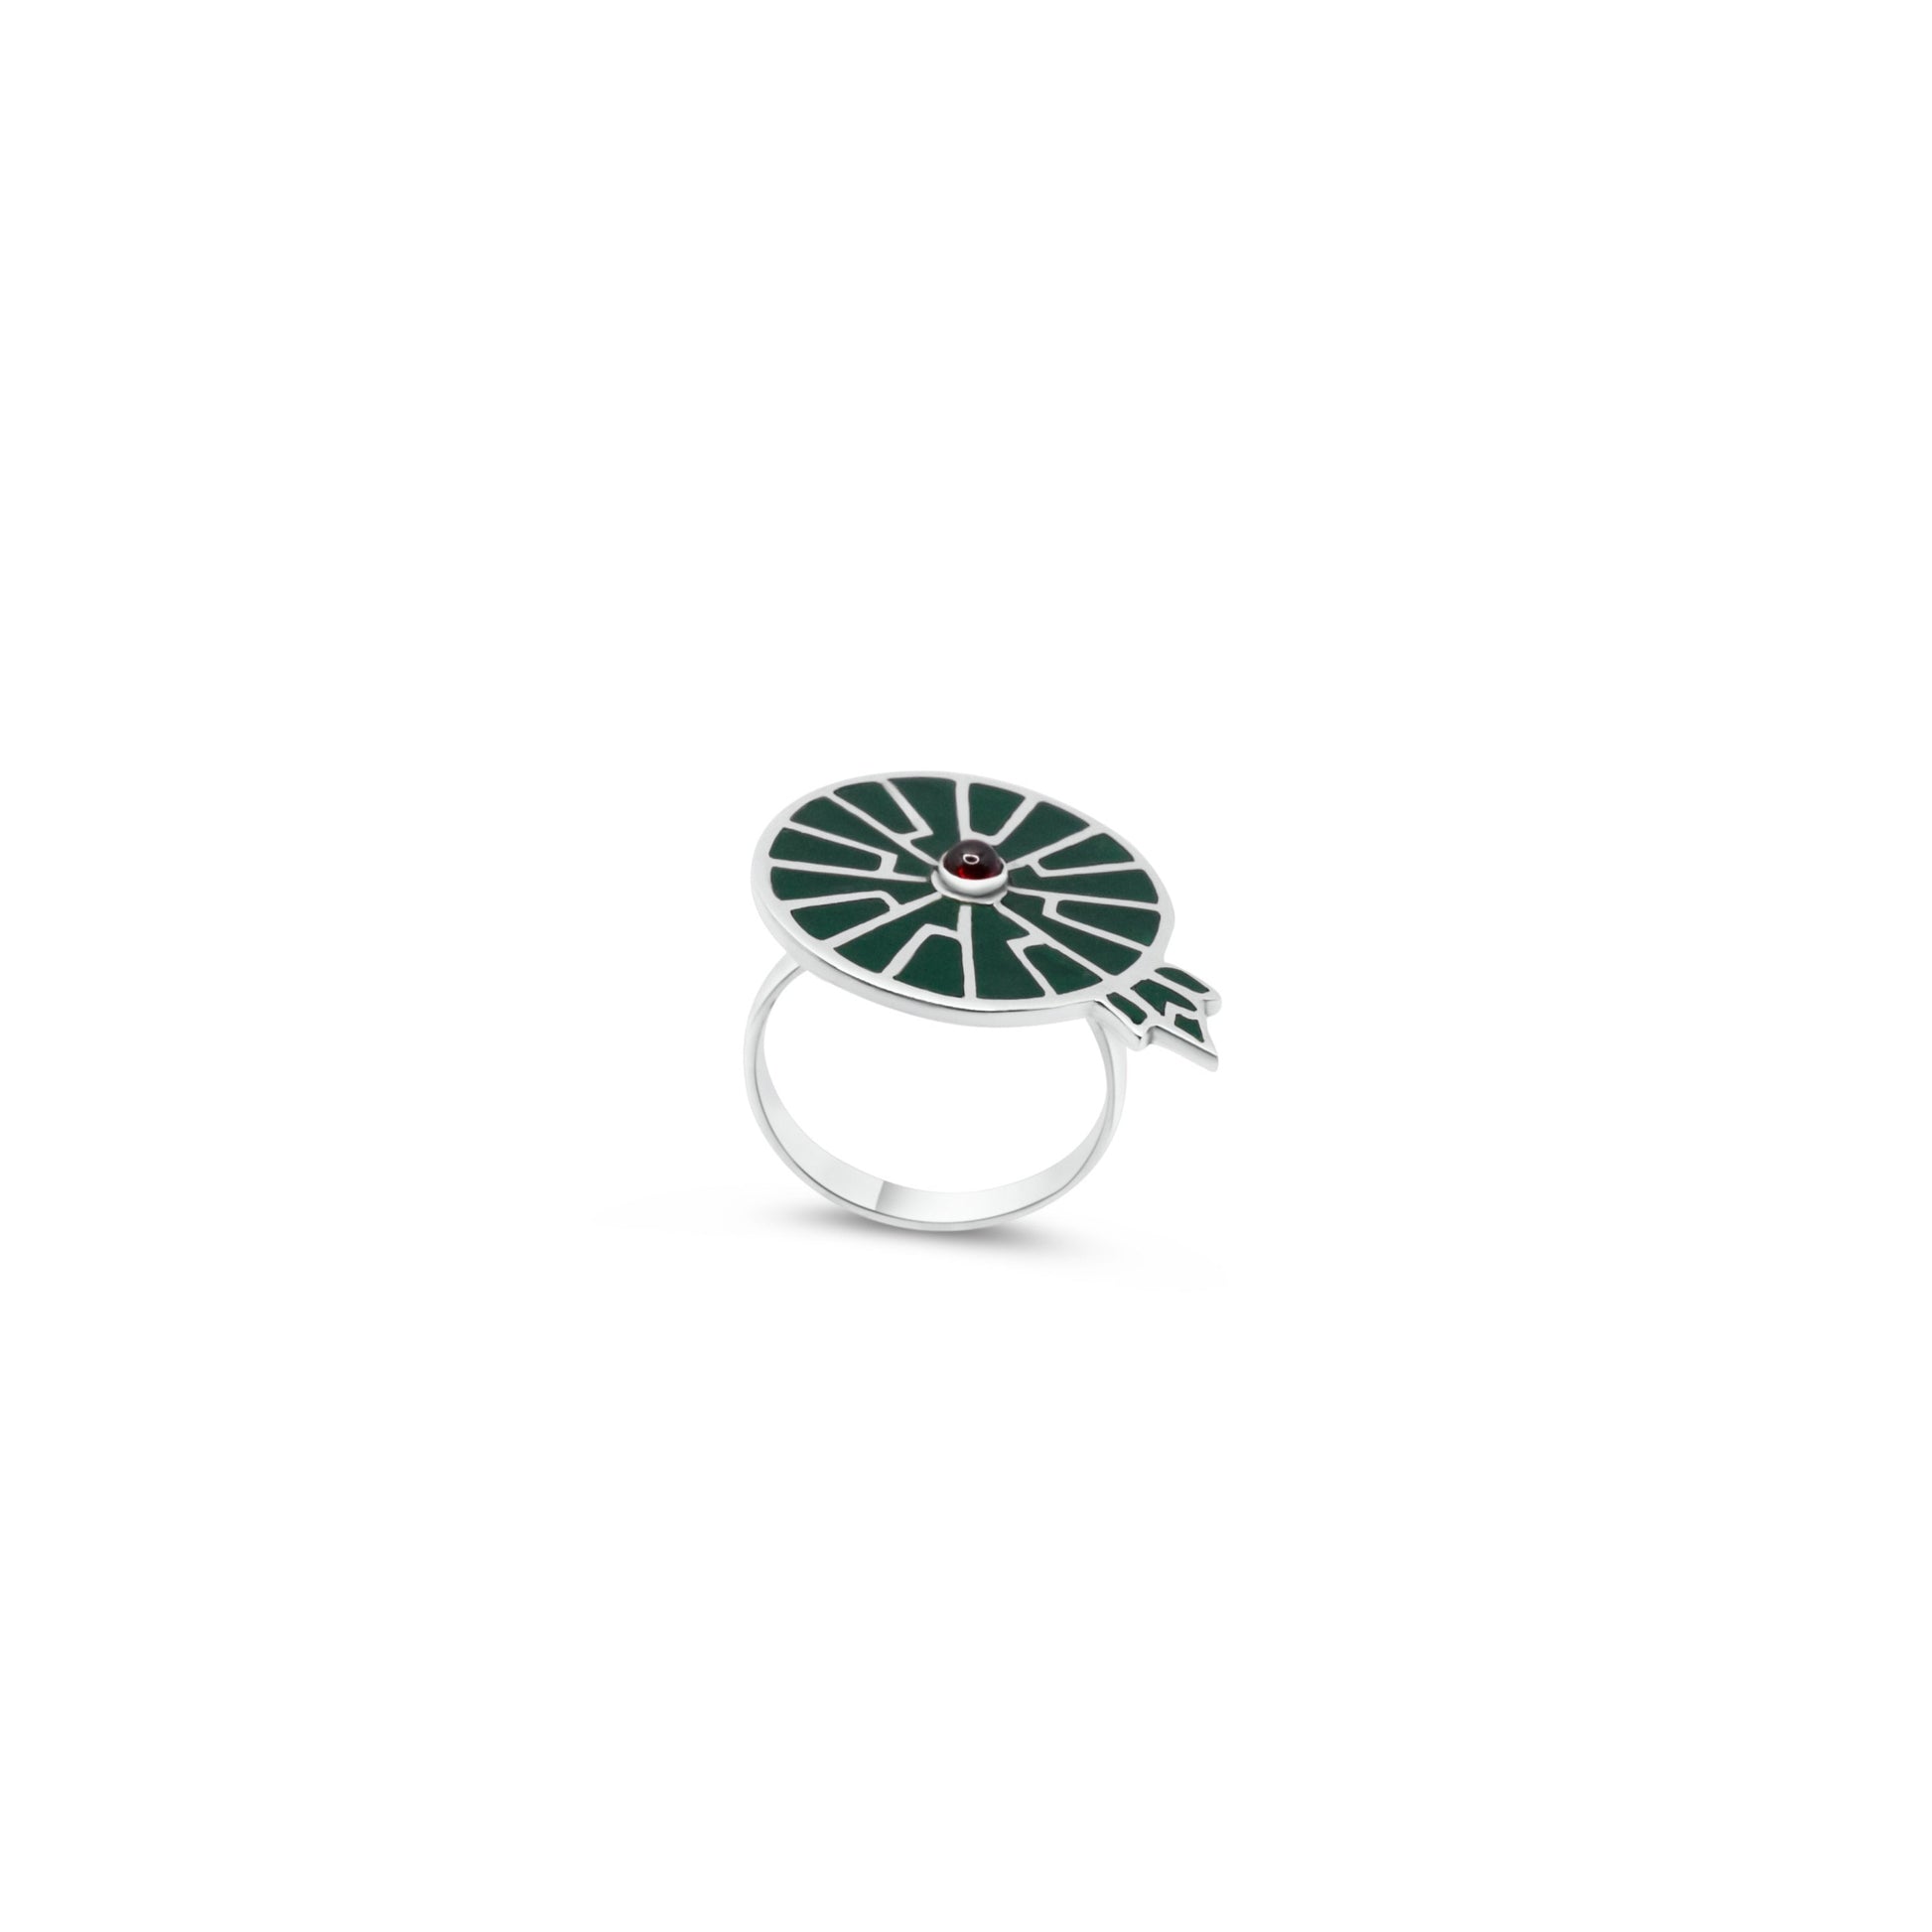 Sterling silver ring inspired by the Victoria Amazonica, with a green inlay and a garnet center, symbolizing the lushness of the Amazon.